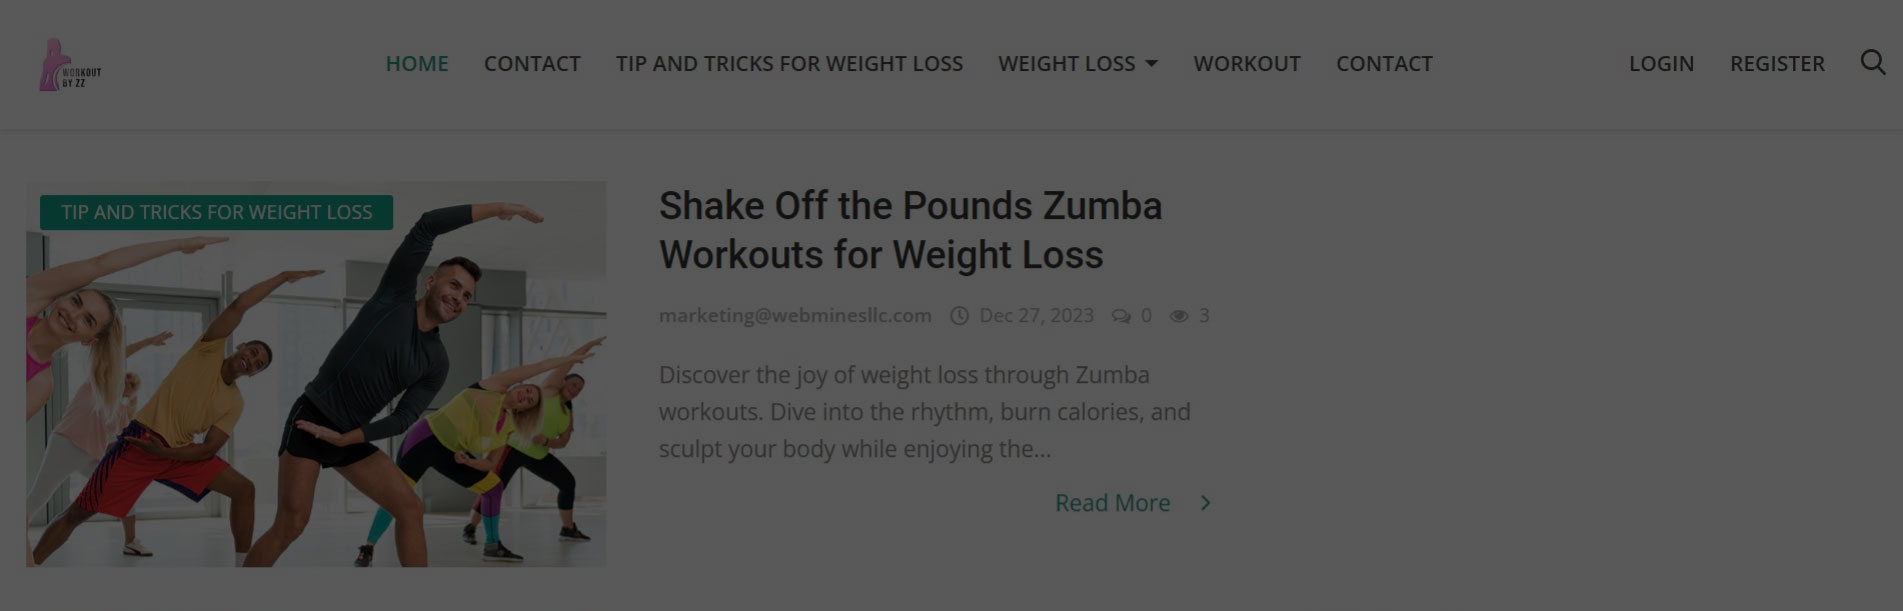 Workouts by ZZ Social Media Before After Retail IndustryWorkouts by ZZ Social Media Retail Industry